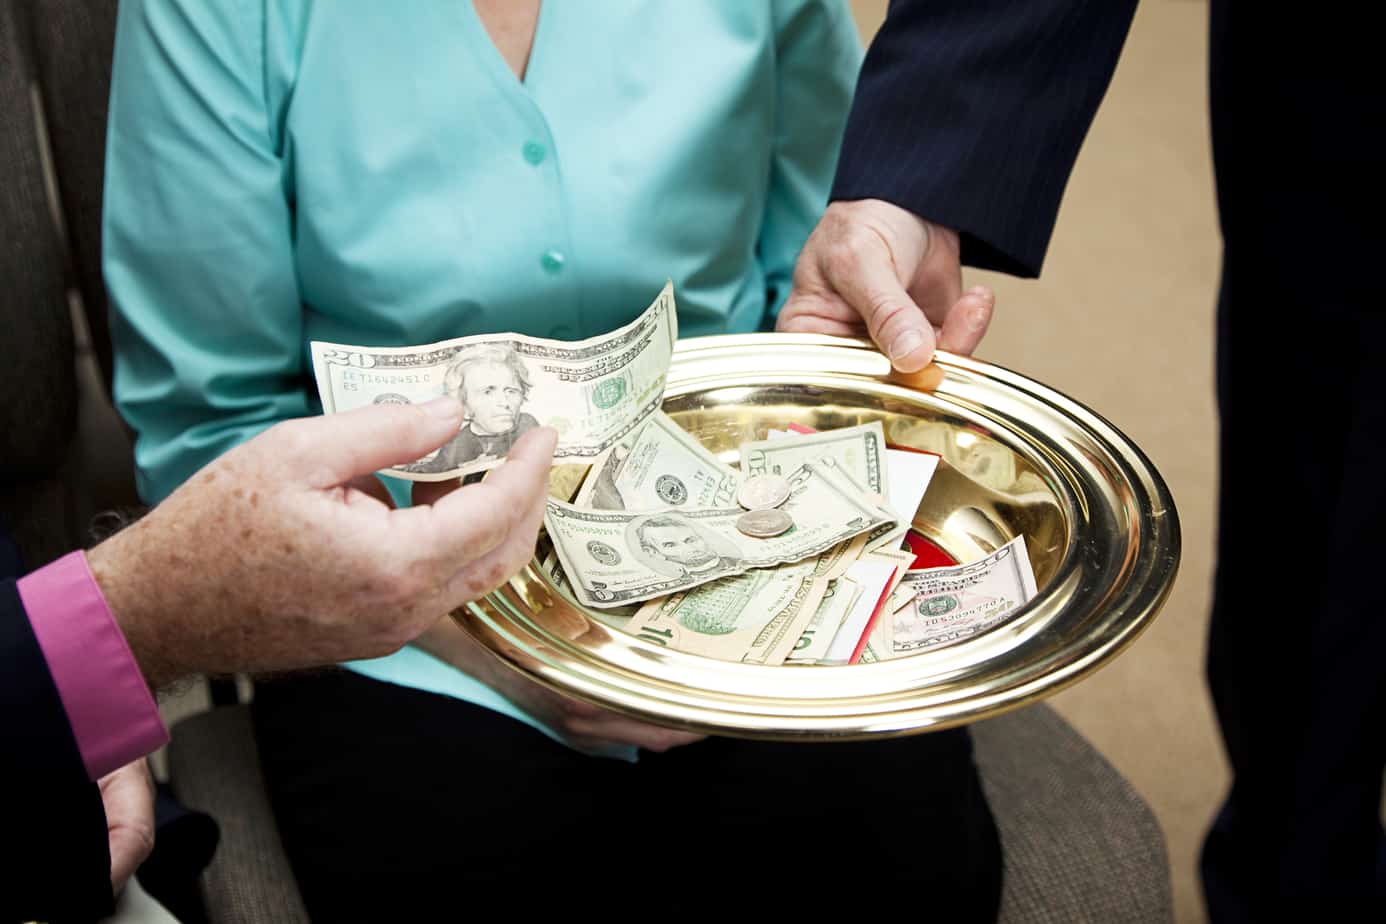 churches ask for money